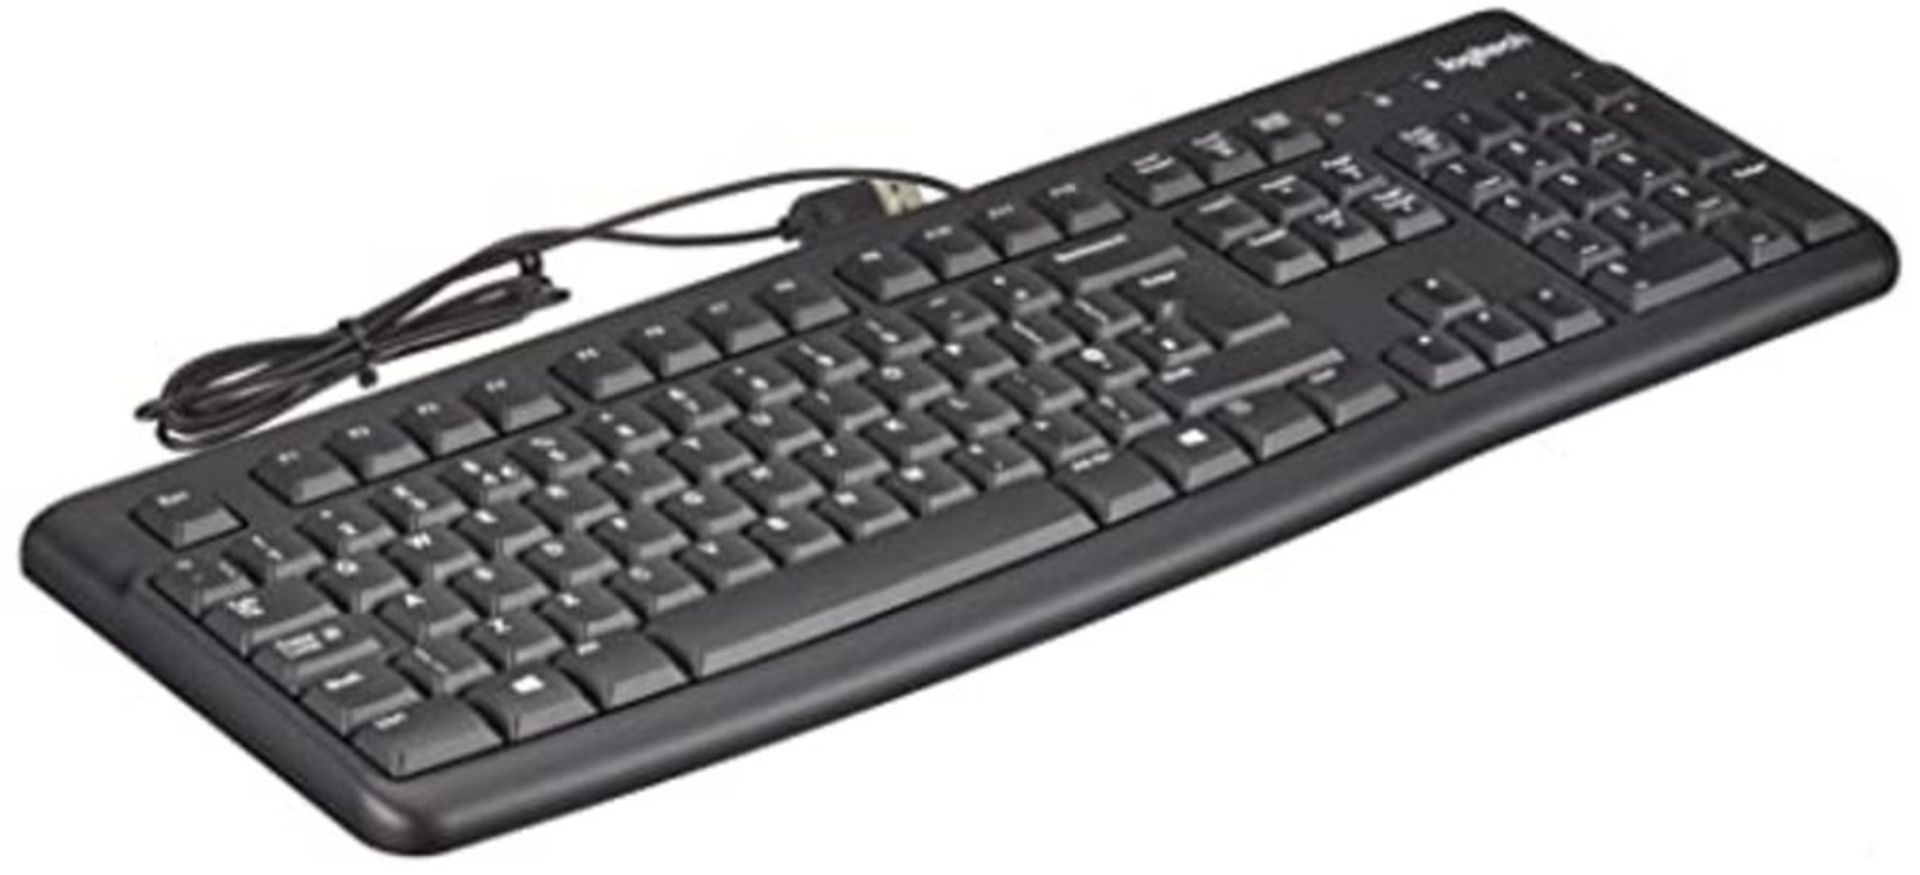 Logitech K120 Wired Business Keyboard for Windows or Linux, USB Plug-and-Play, Full-Si